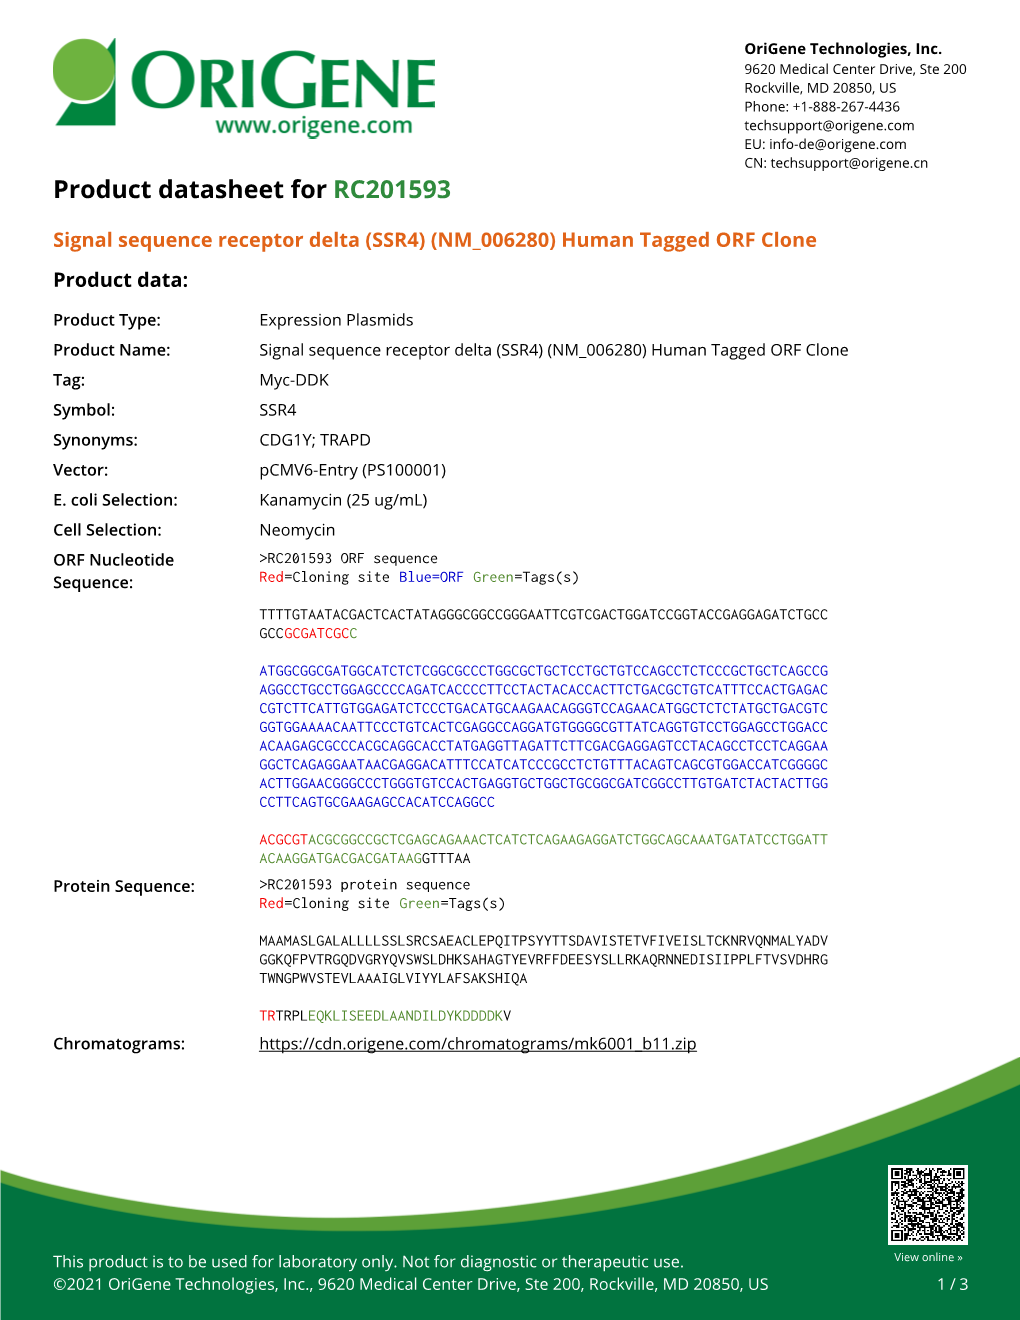 Signal Sequence Receptor Delta (SSR4) (NM 006280) Human Tagged ORF Clone Product Data